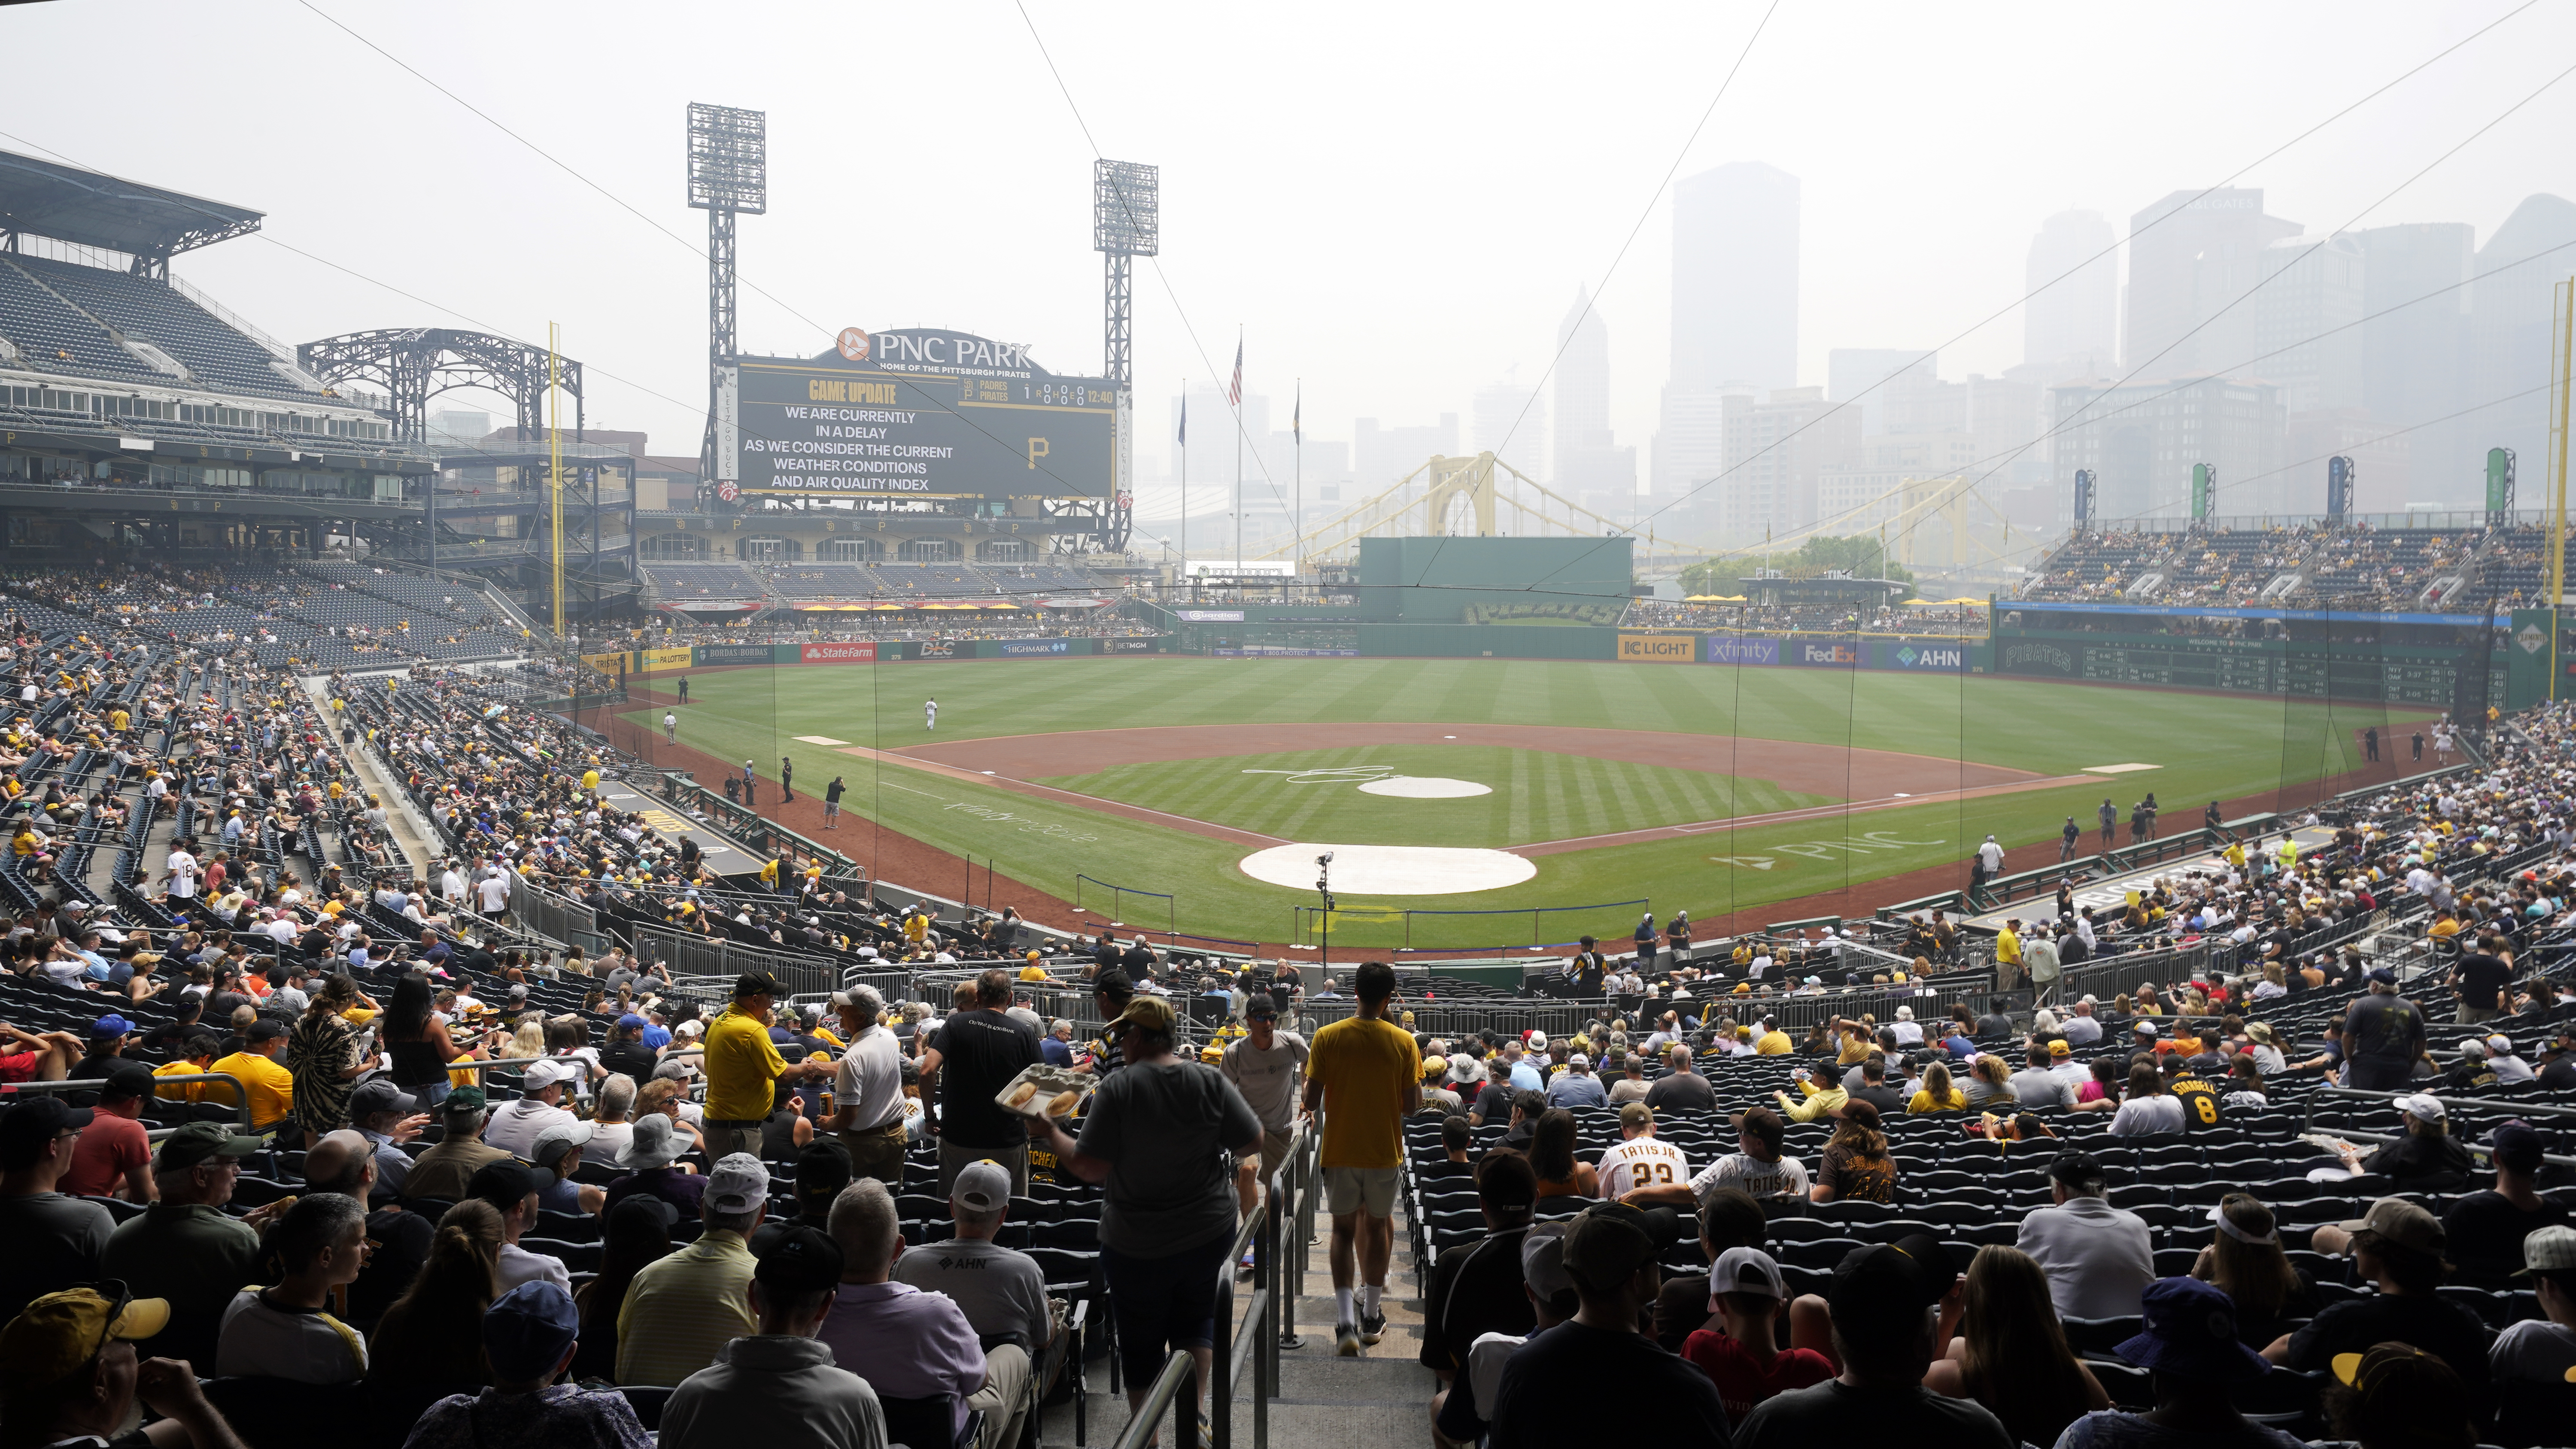 Pittsburgh Pirates delay start of Thursday's game due to air quality – WPXI